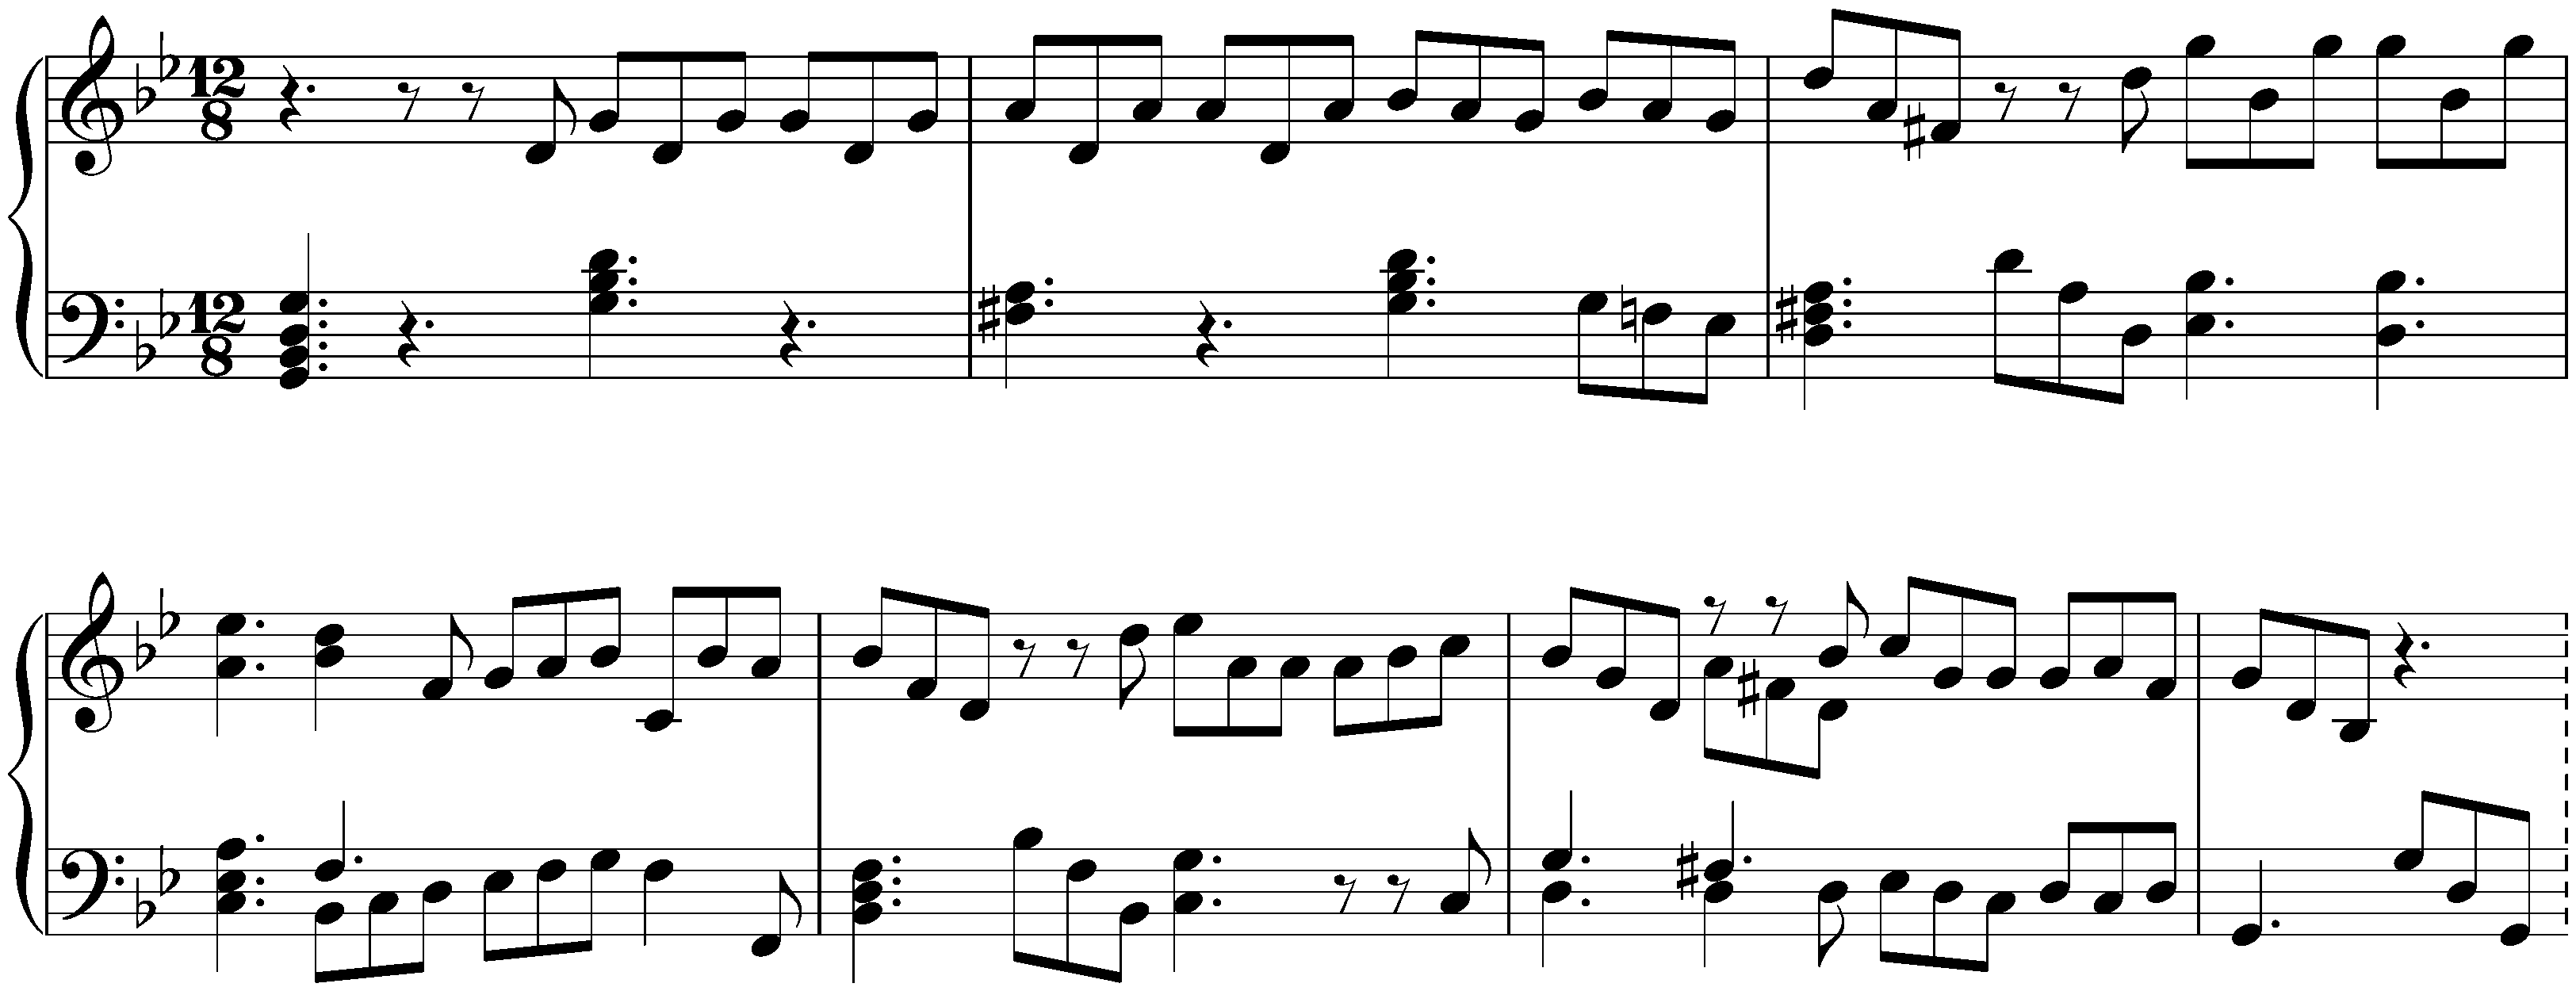 Gigue in G minor, HWV 493a